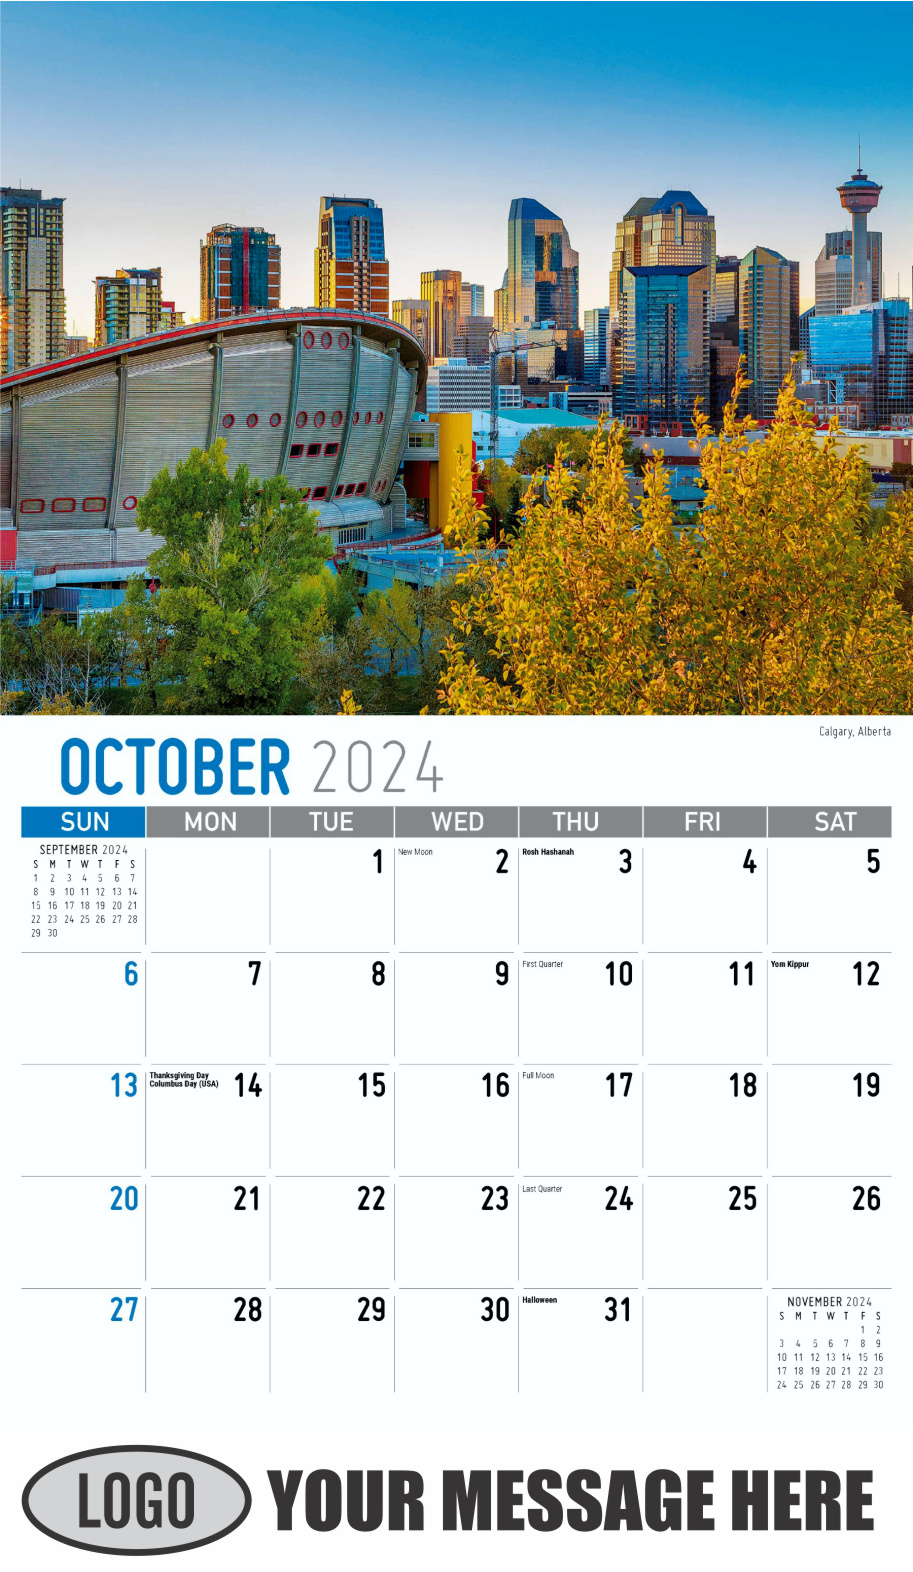 Scenes of Western Canada 2024 Business Promotional Wall Calendar - October